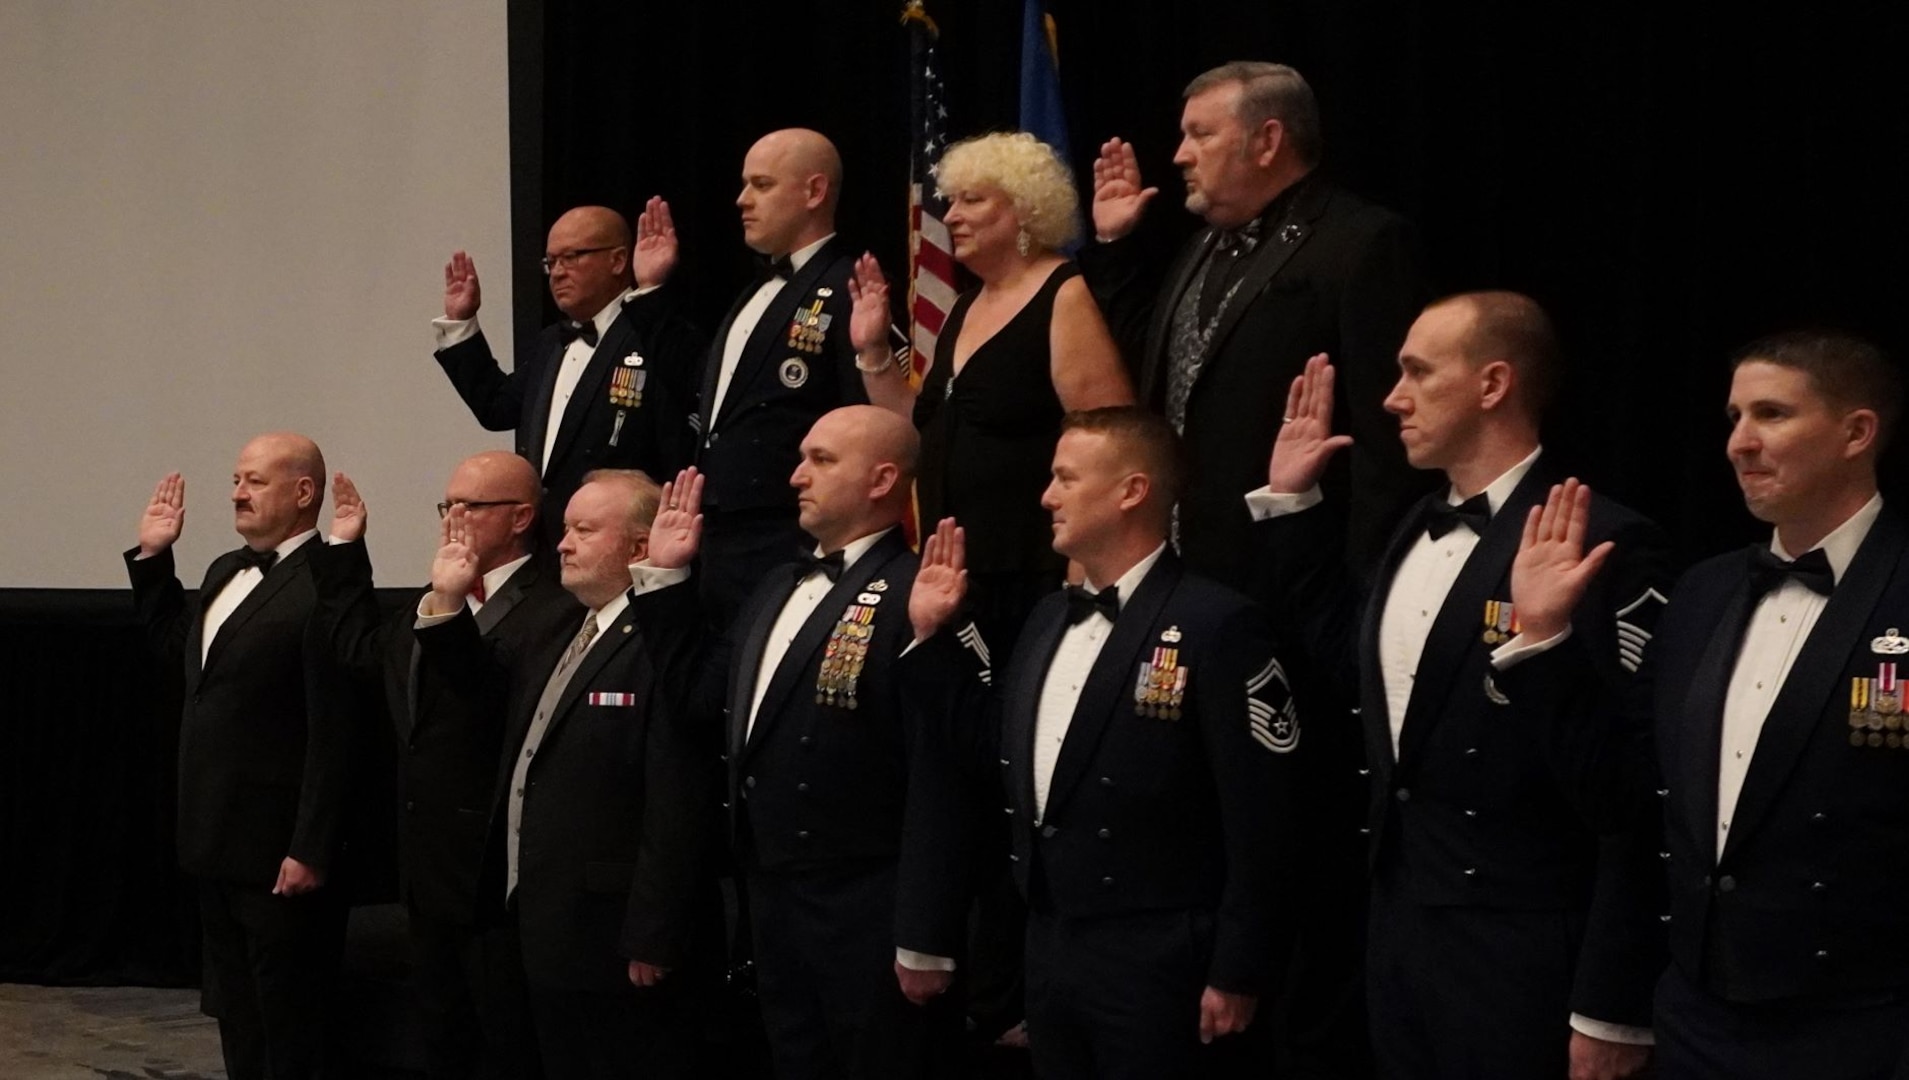 New Air Force Sergeants Association board of directors, including two Air Force recruiters, swear in to their volunteer positions at the association’s Professional Education and Development Symposium July 2021 in Orlando, Florida.